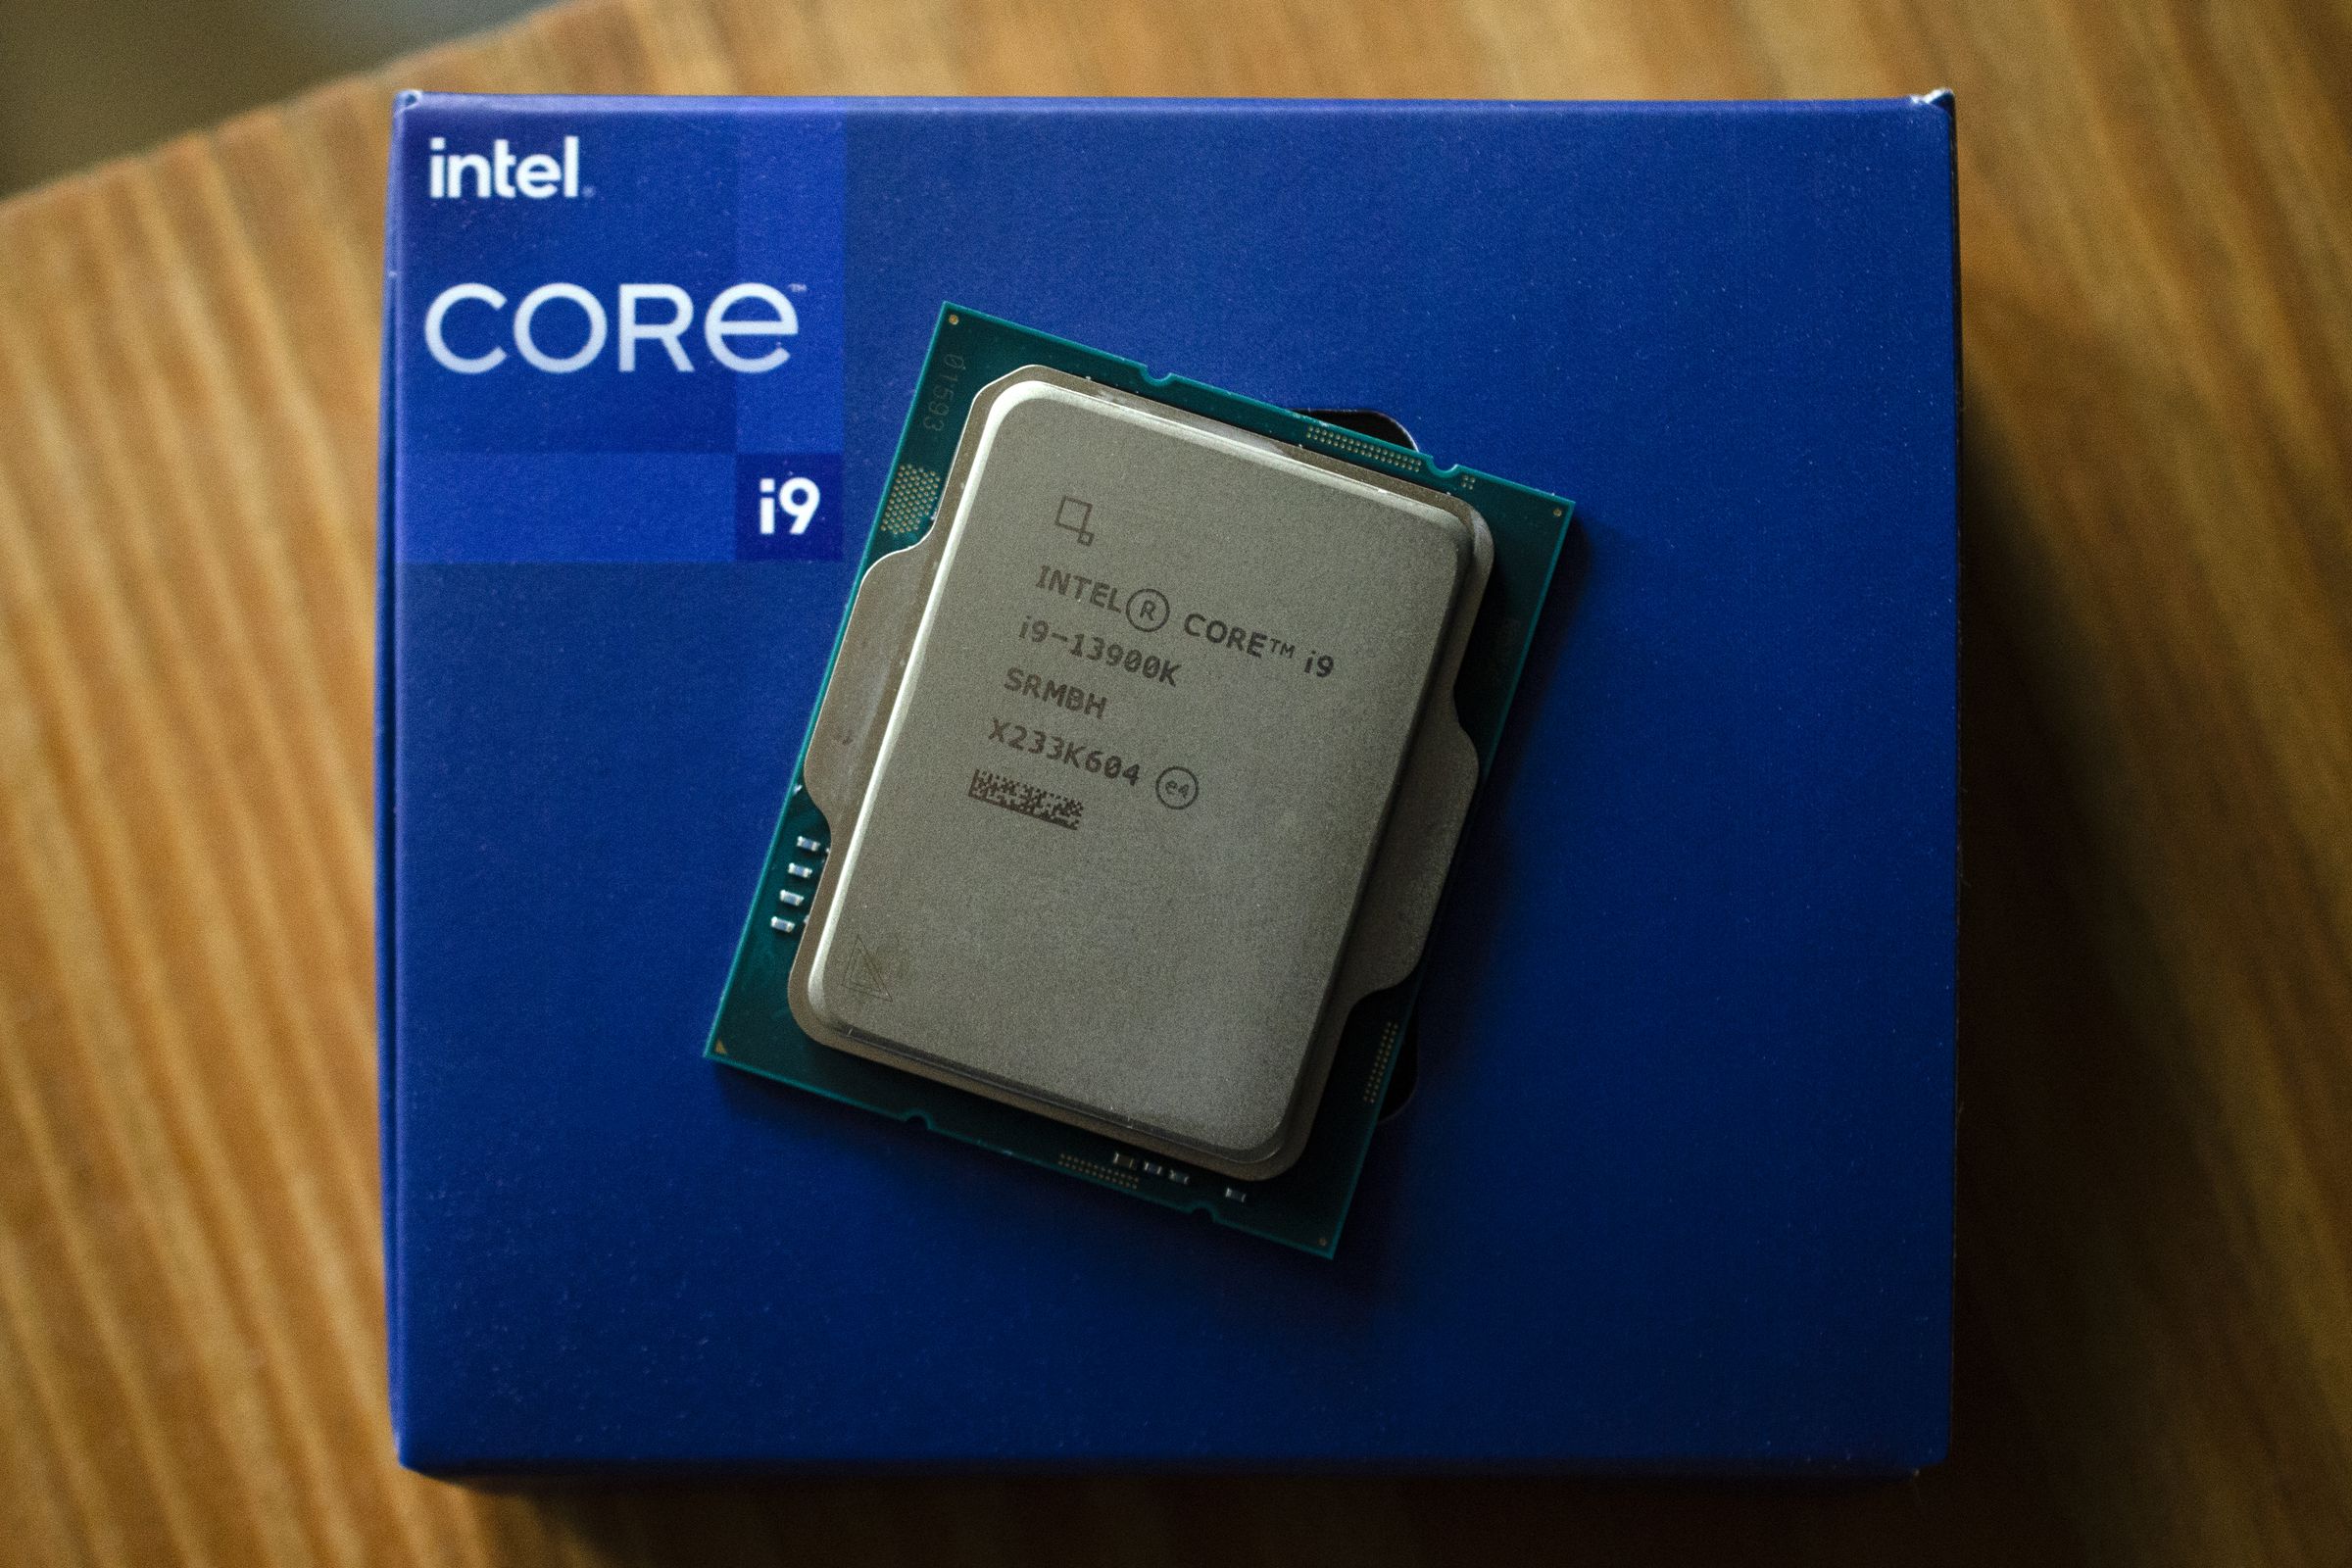 Intel’s latest Core i9-13900K processor and its packaging